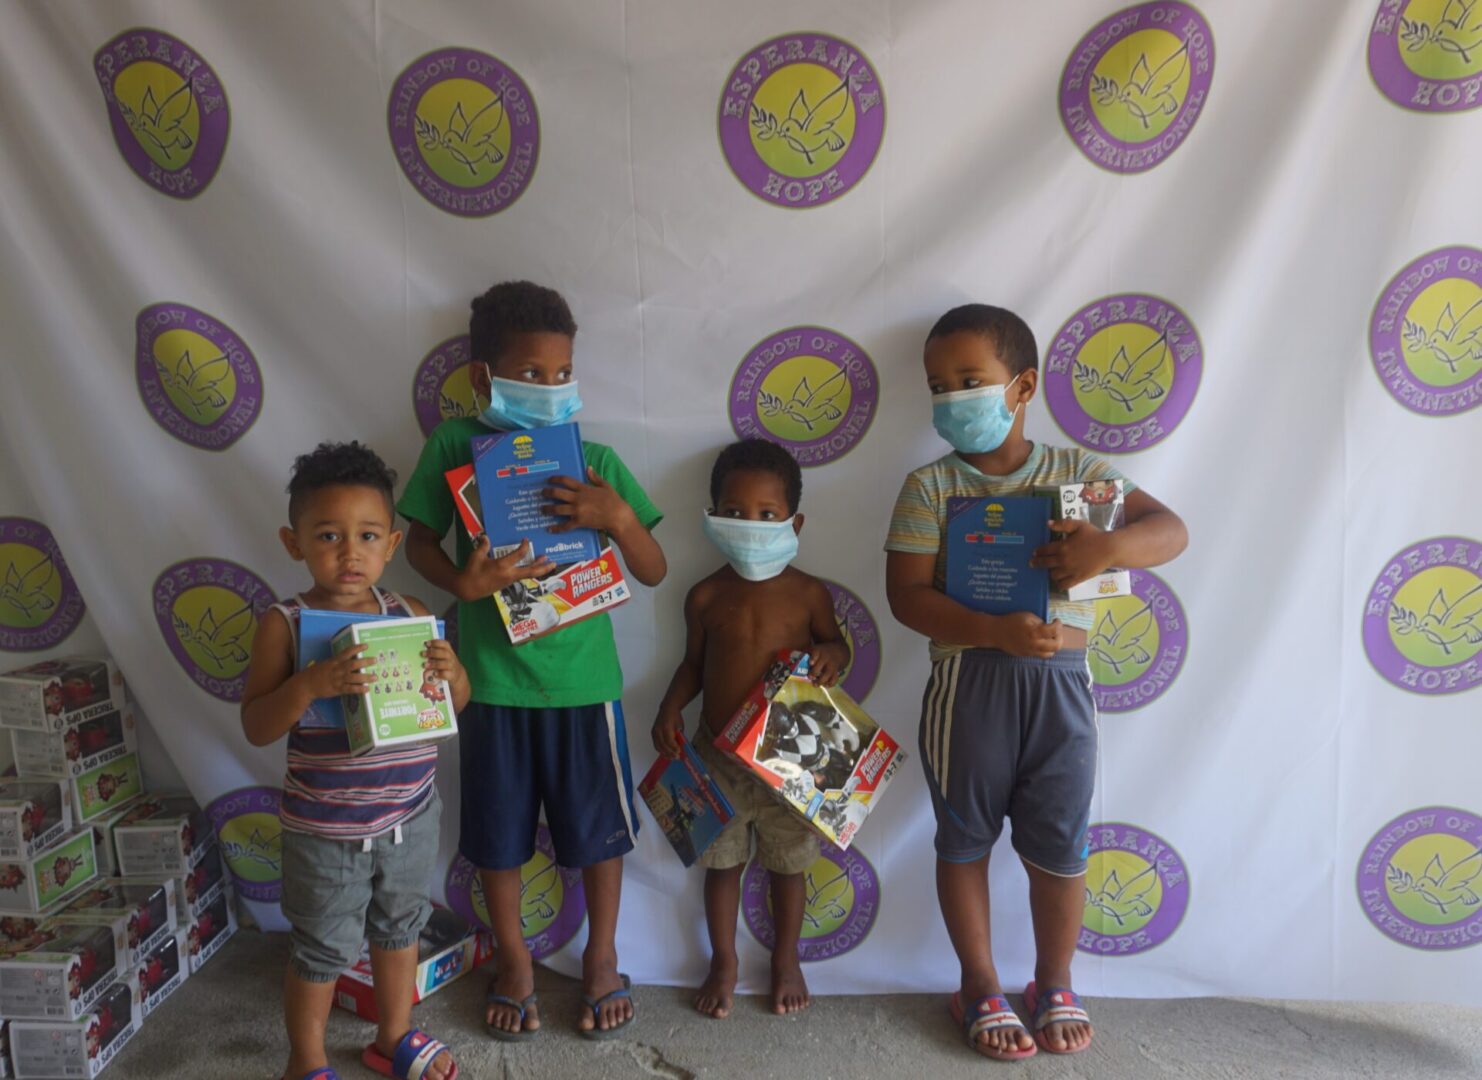 Four young boys standing against the Esperanza-Hope backdrop with their toys and books